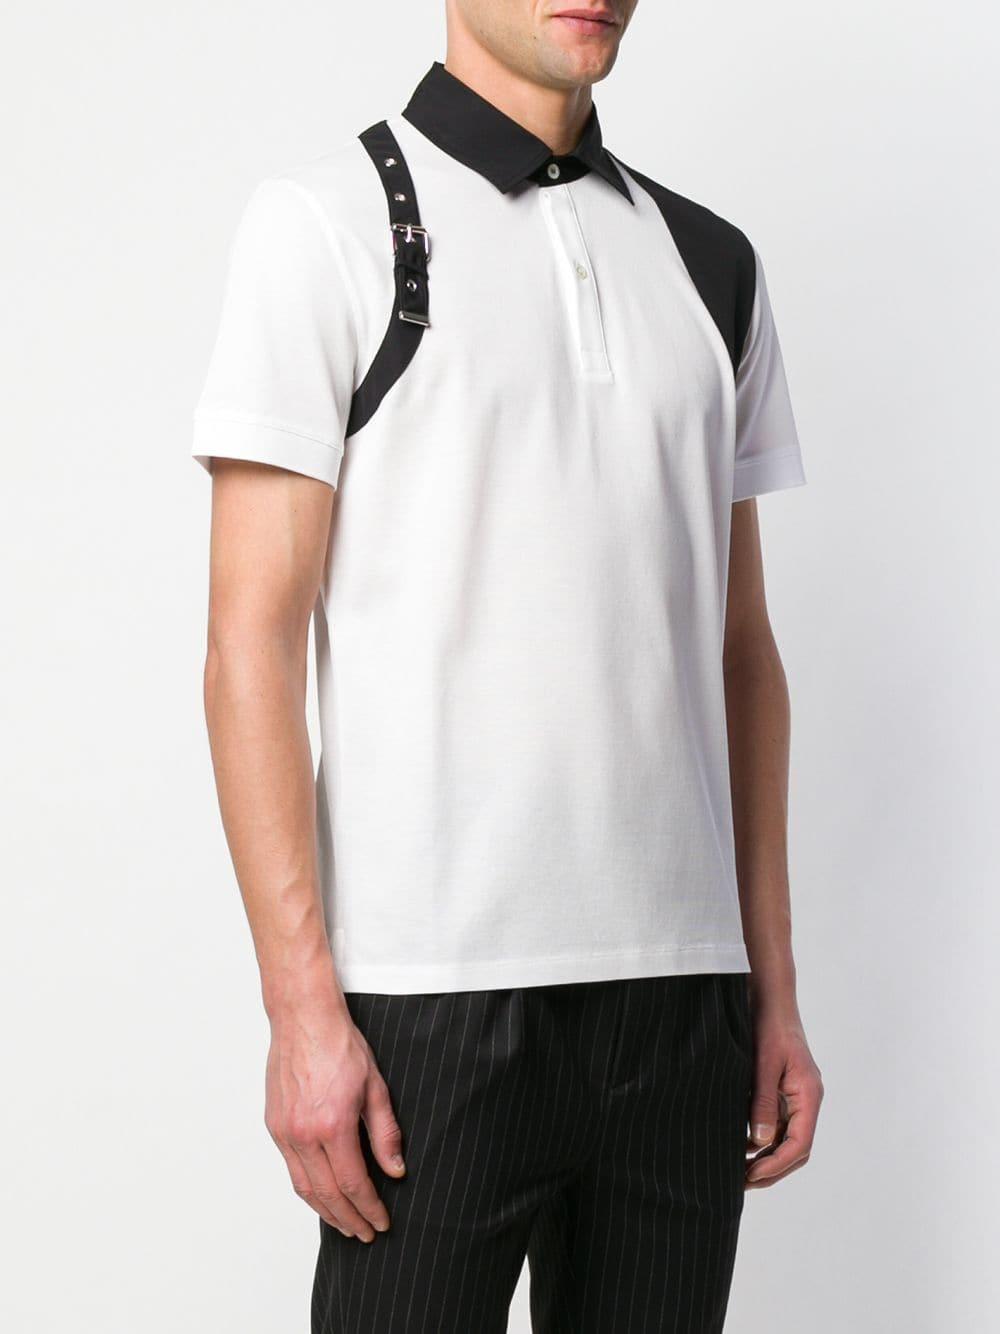 Alexander McQueen Cotton Harness Detail Polo Shirt in White for Men - Lyst